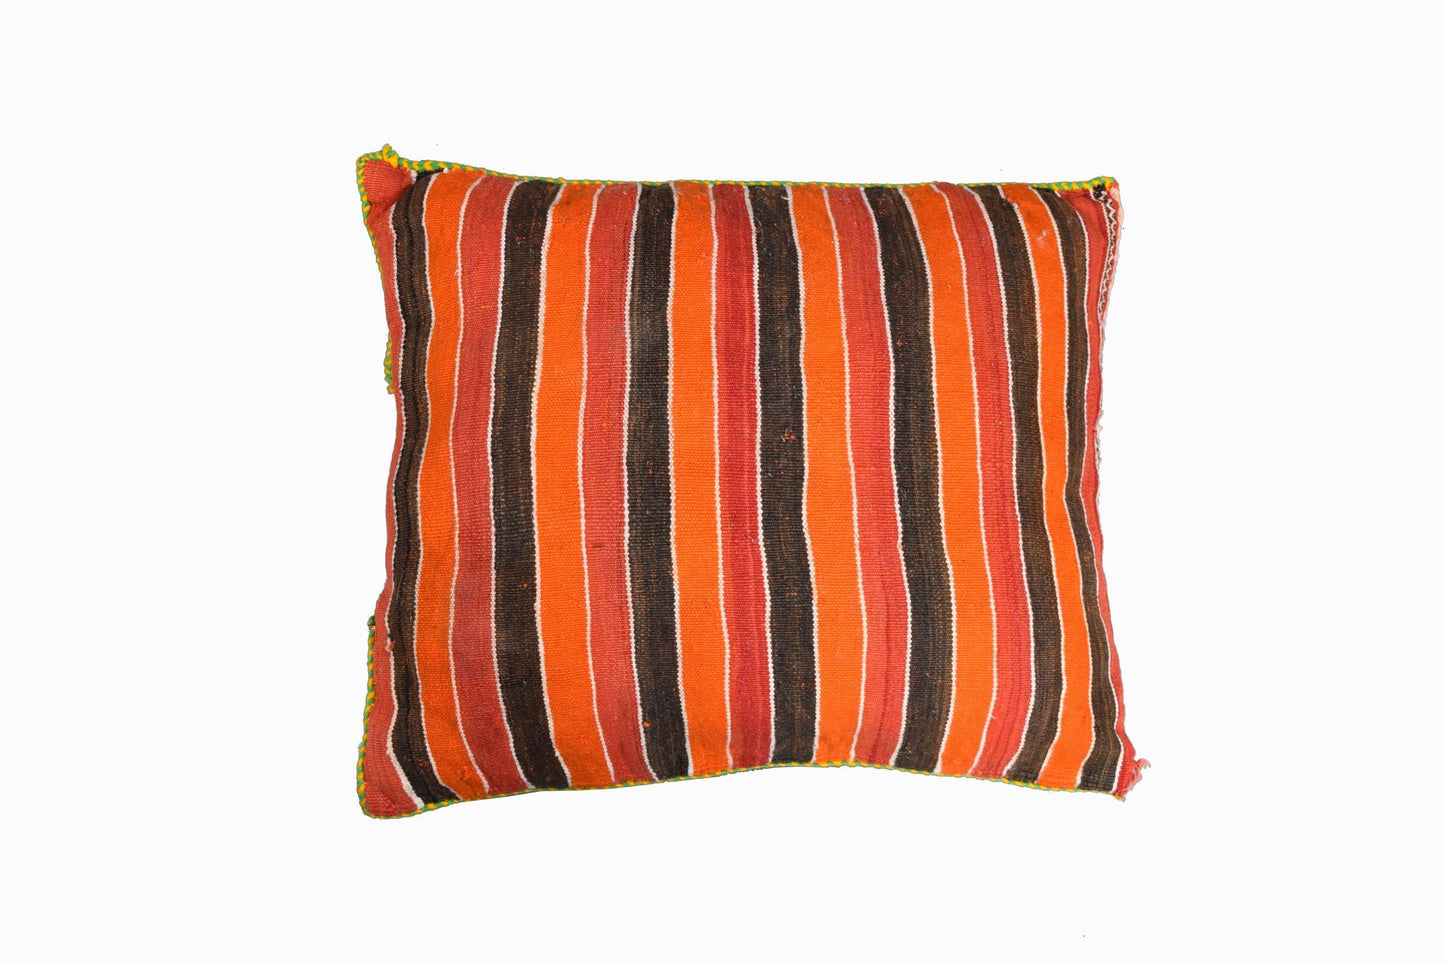 MOROCCAN EMBROIDERED CUSHION REF 7